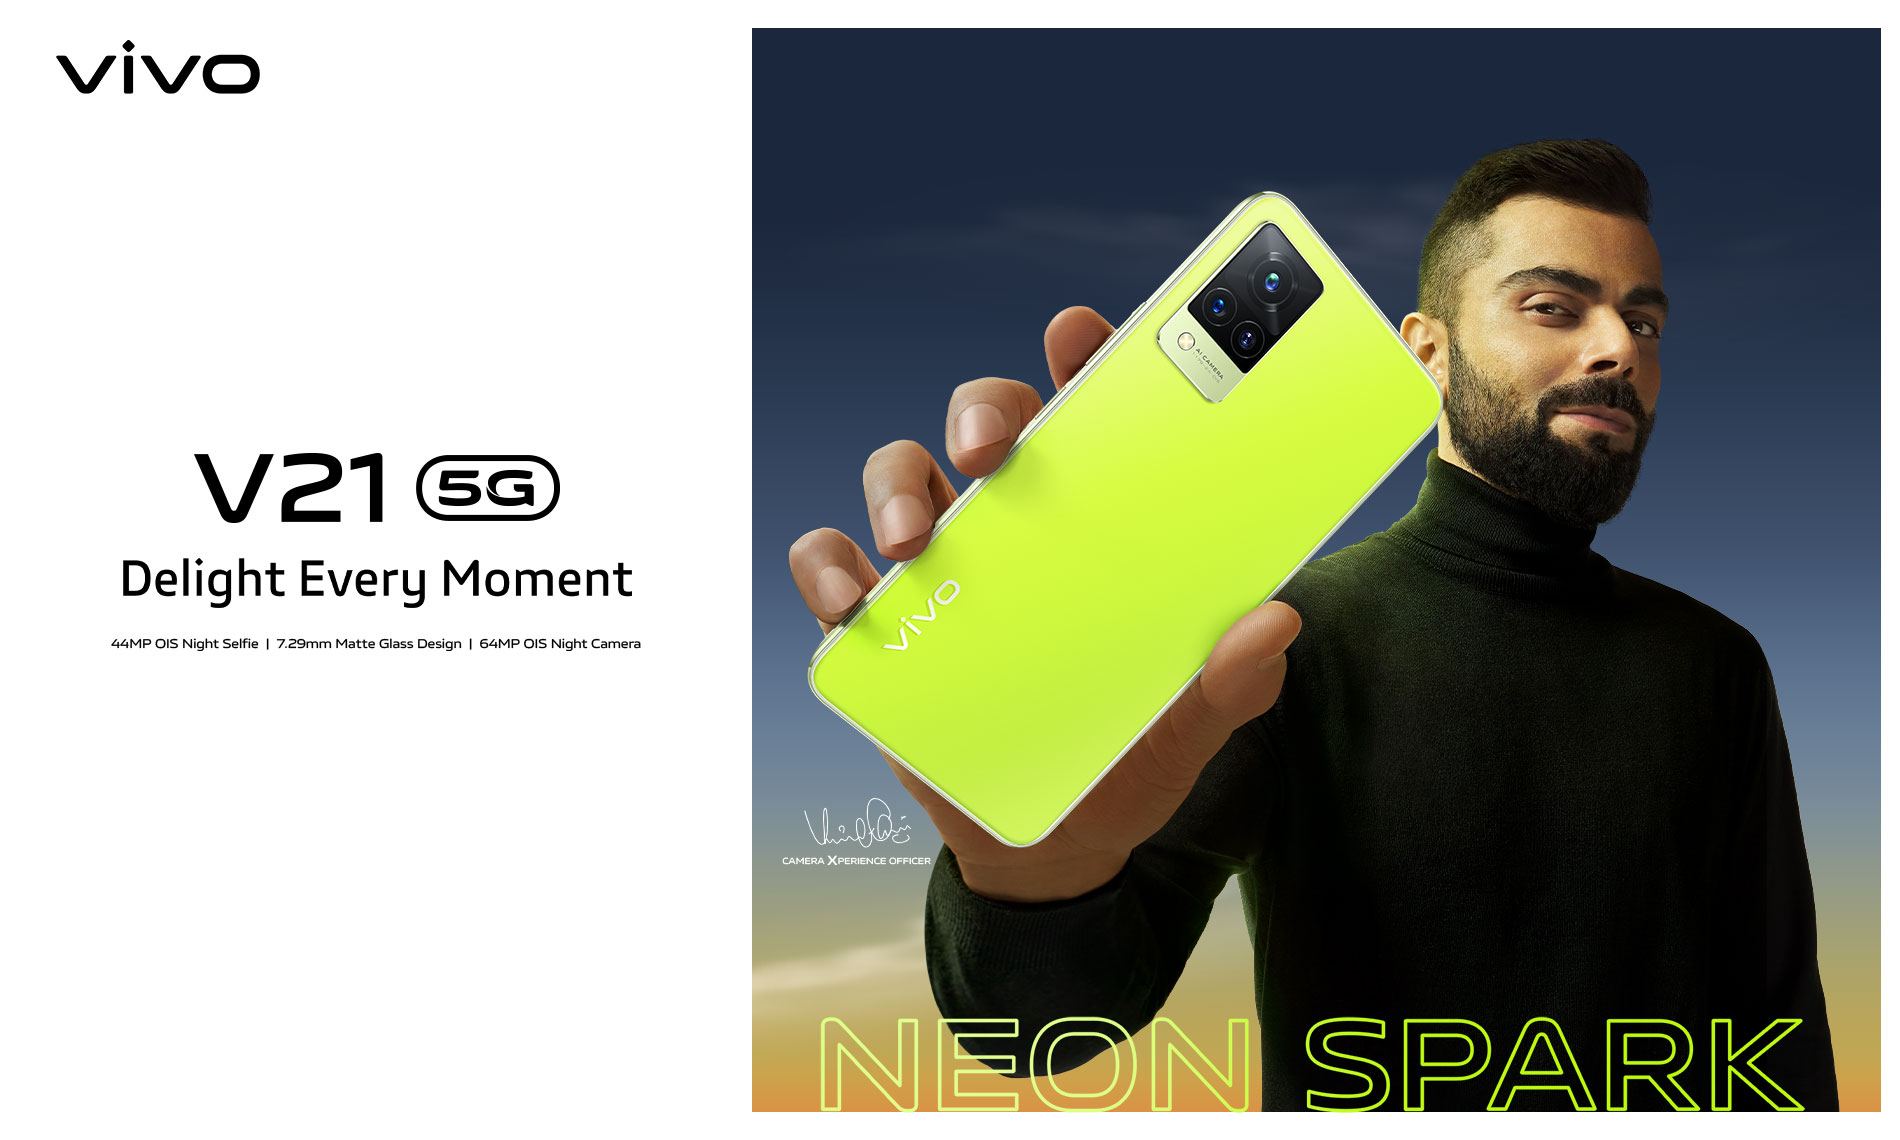 vivo introduces V21 Neon Spark; The New Avatar of V21 in a Bold Striking Appeal